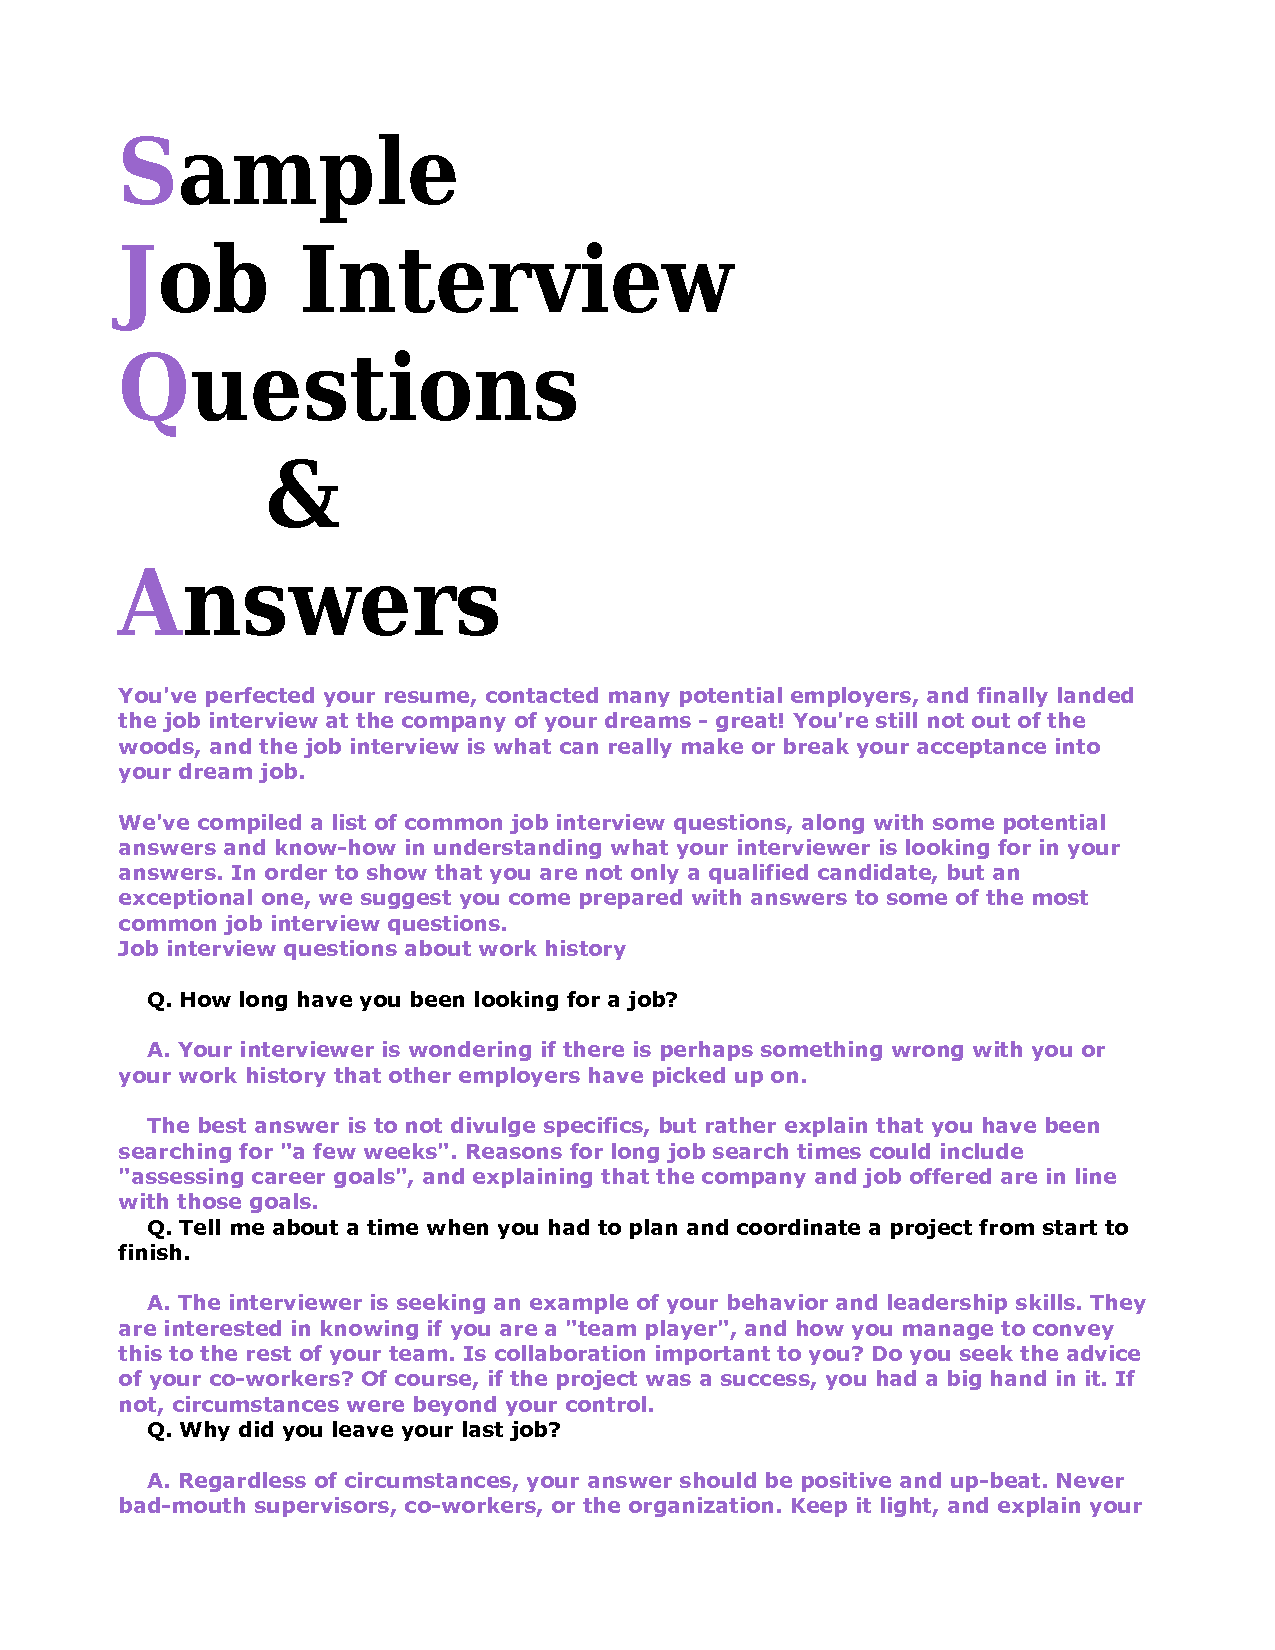 Common question and answers in job interview